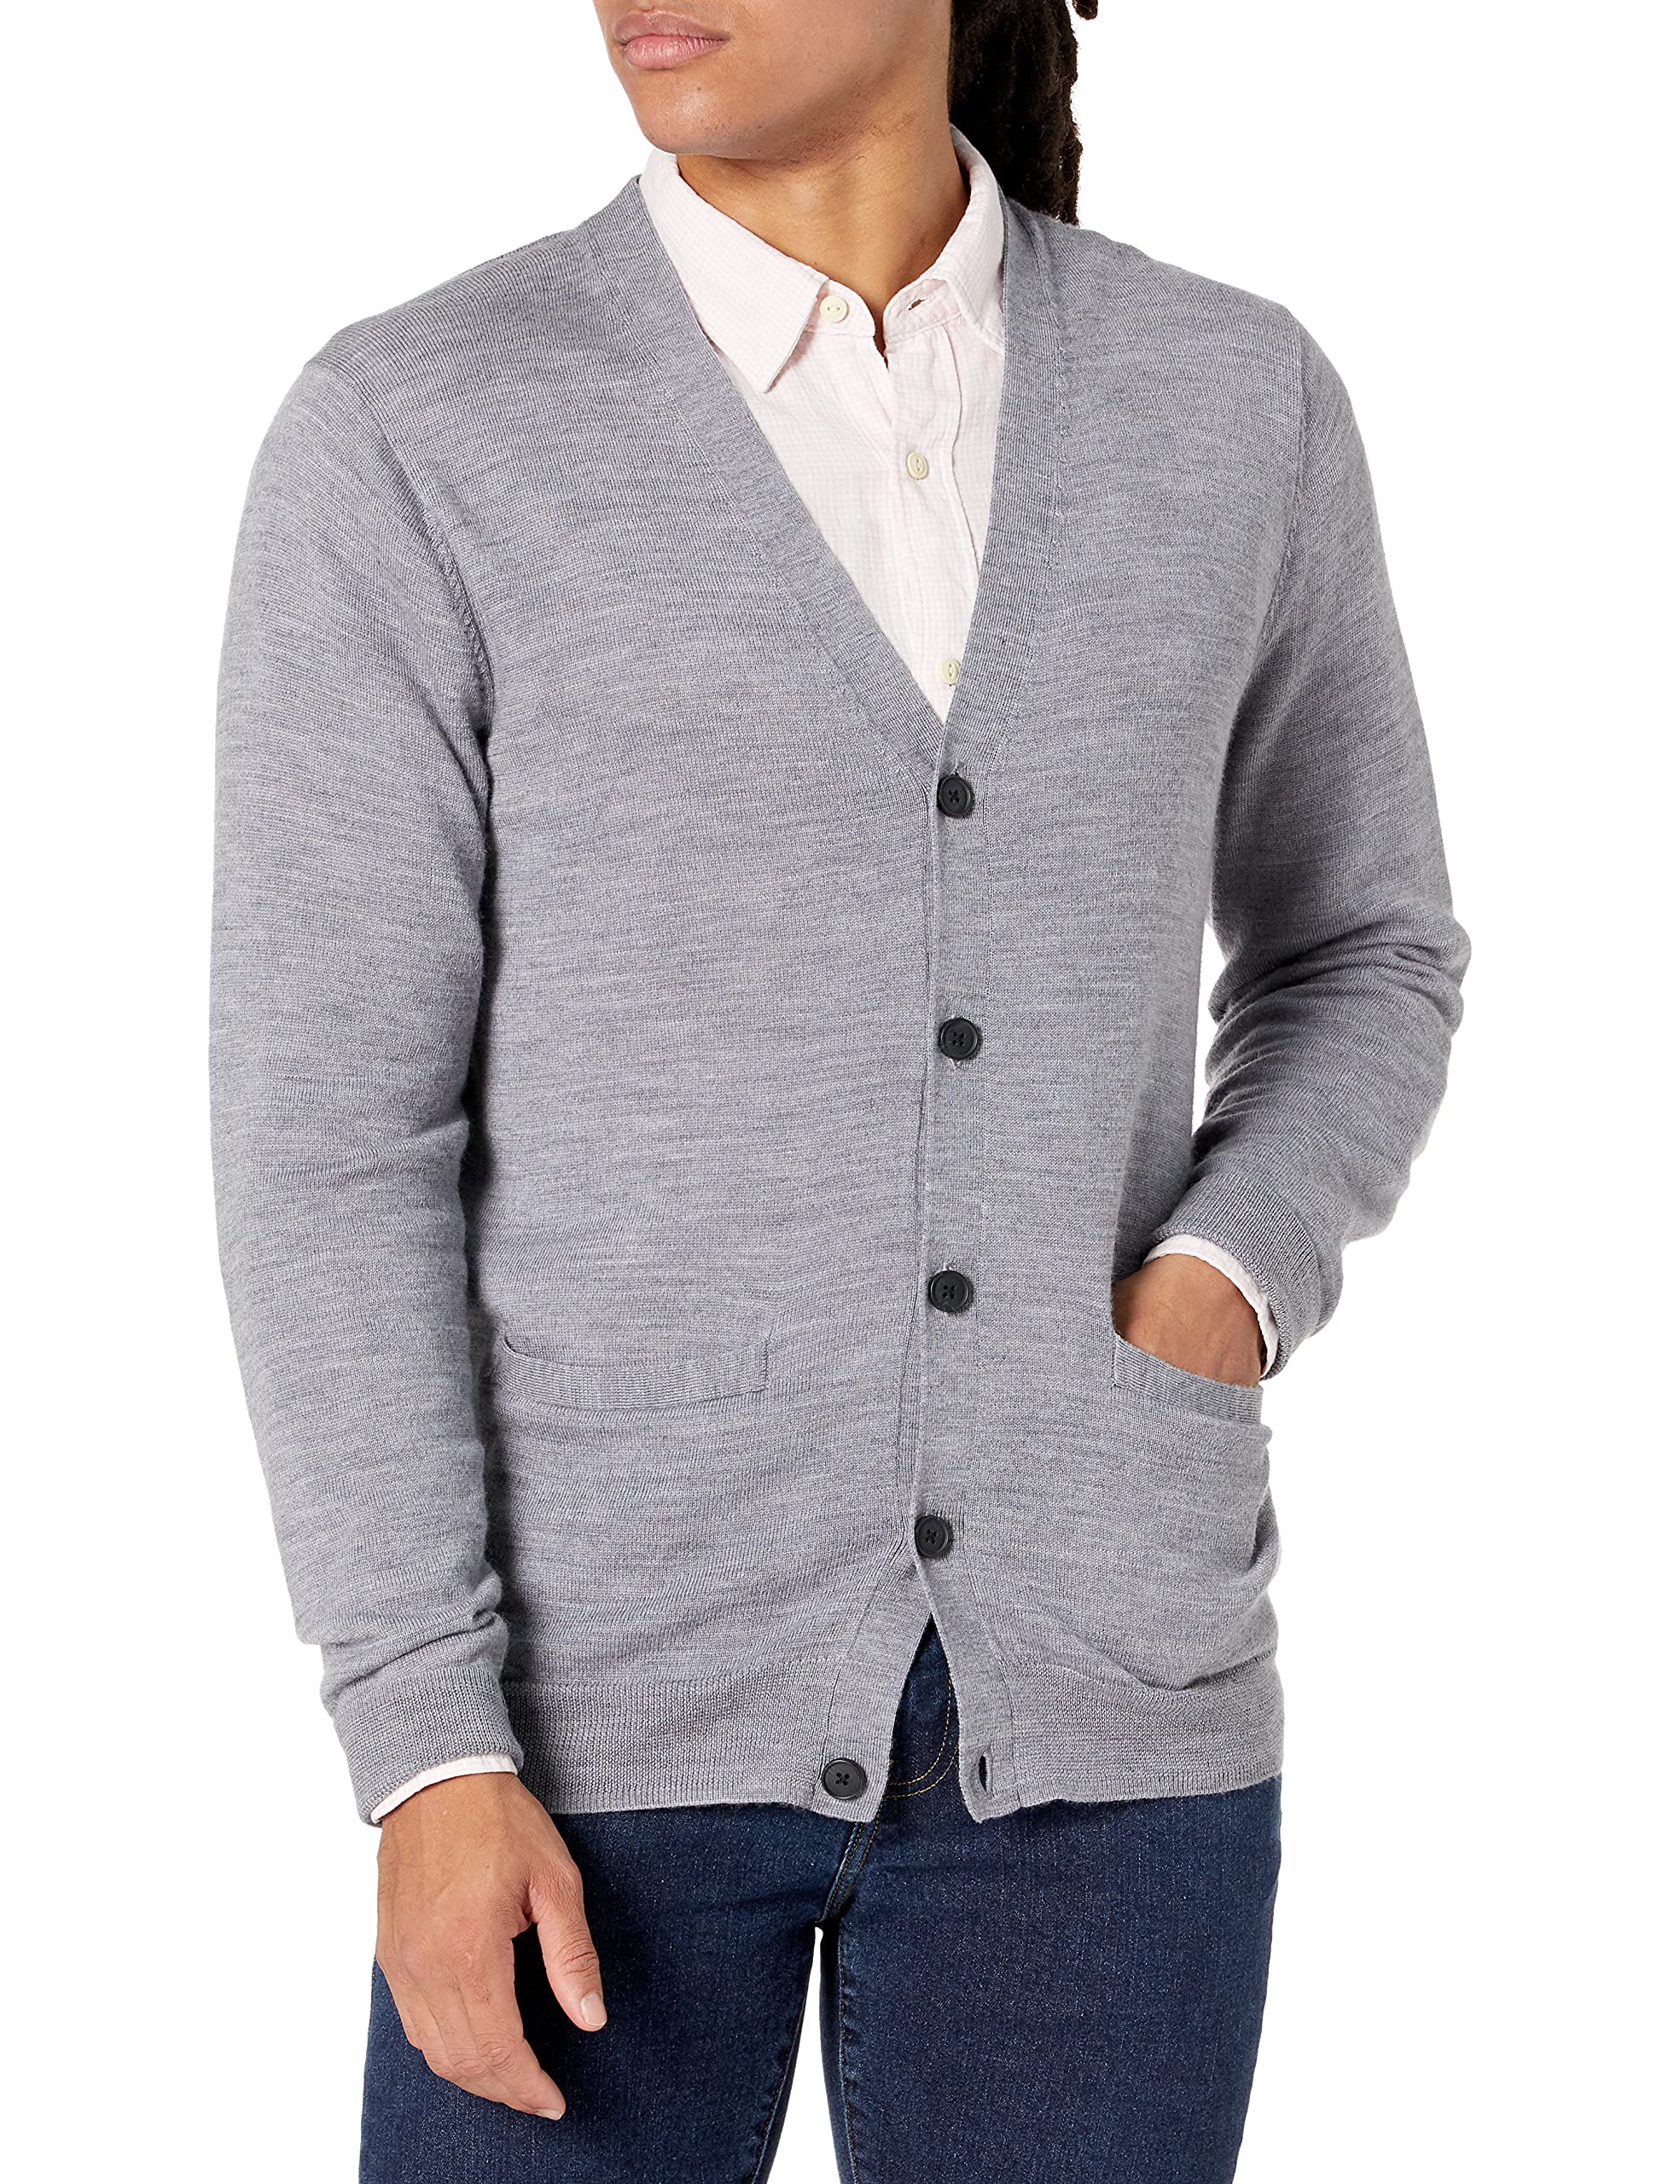 Lightweight cardigan sweaters is an essential part of any man's wardrobe, particularly during transitional seasons or as a layering piece in cooler climates.